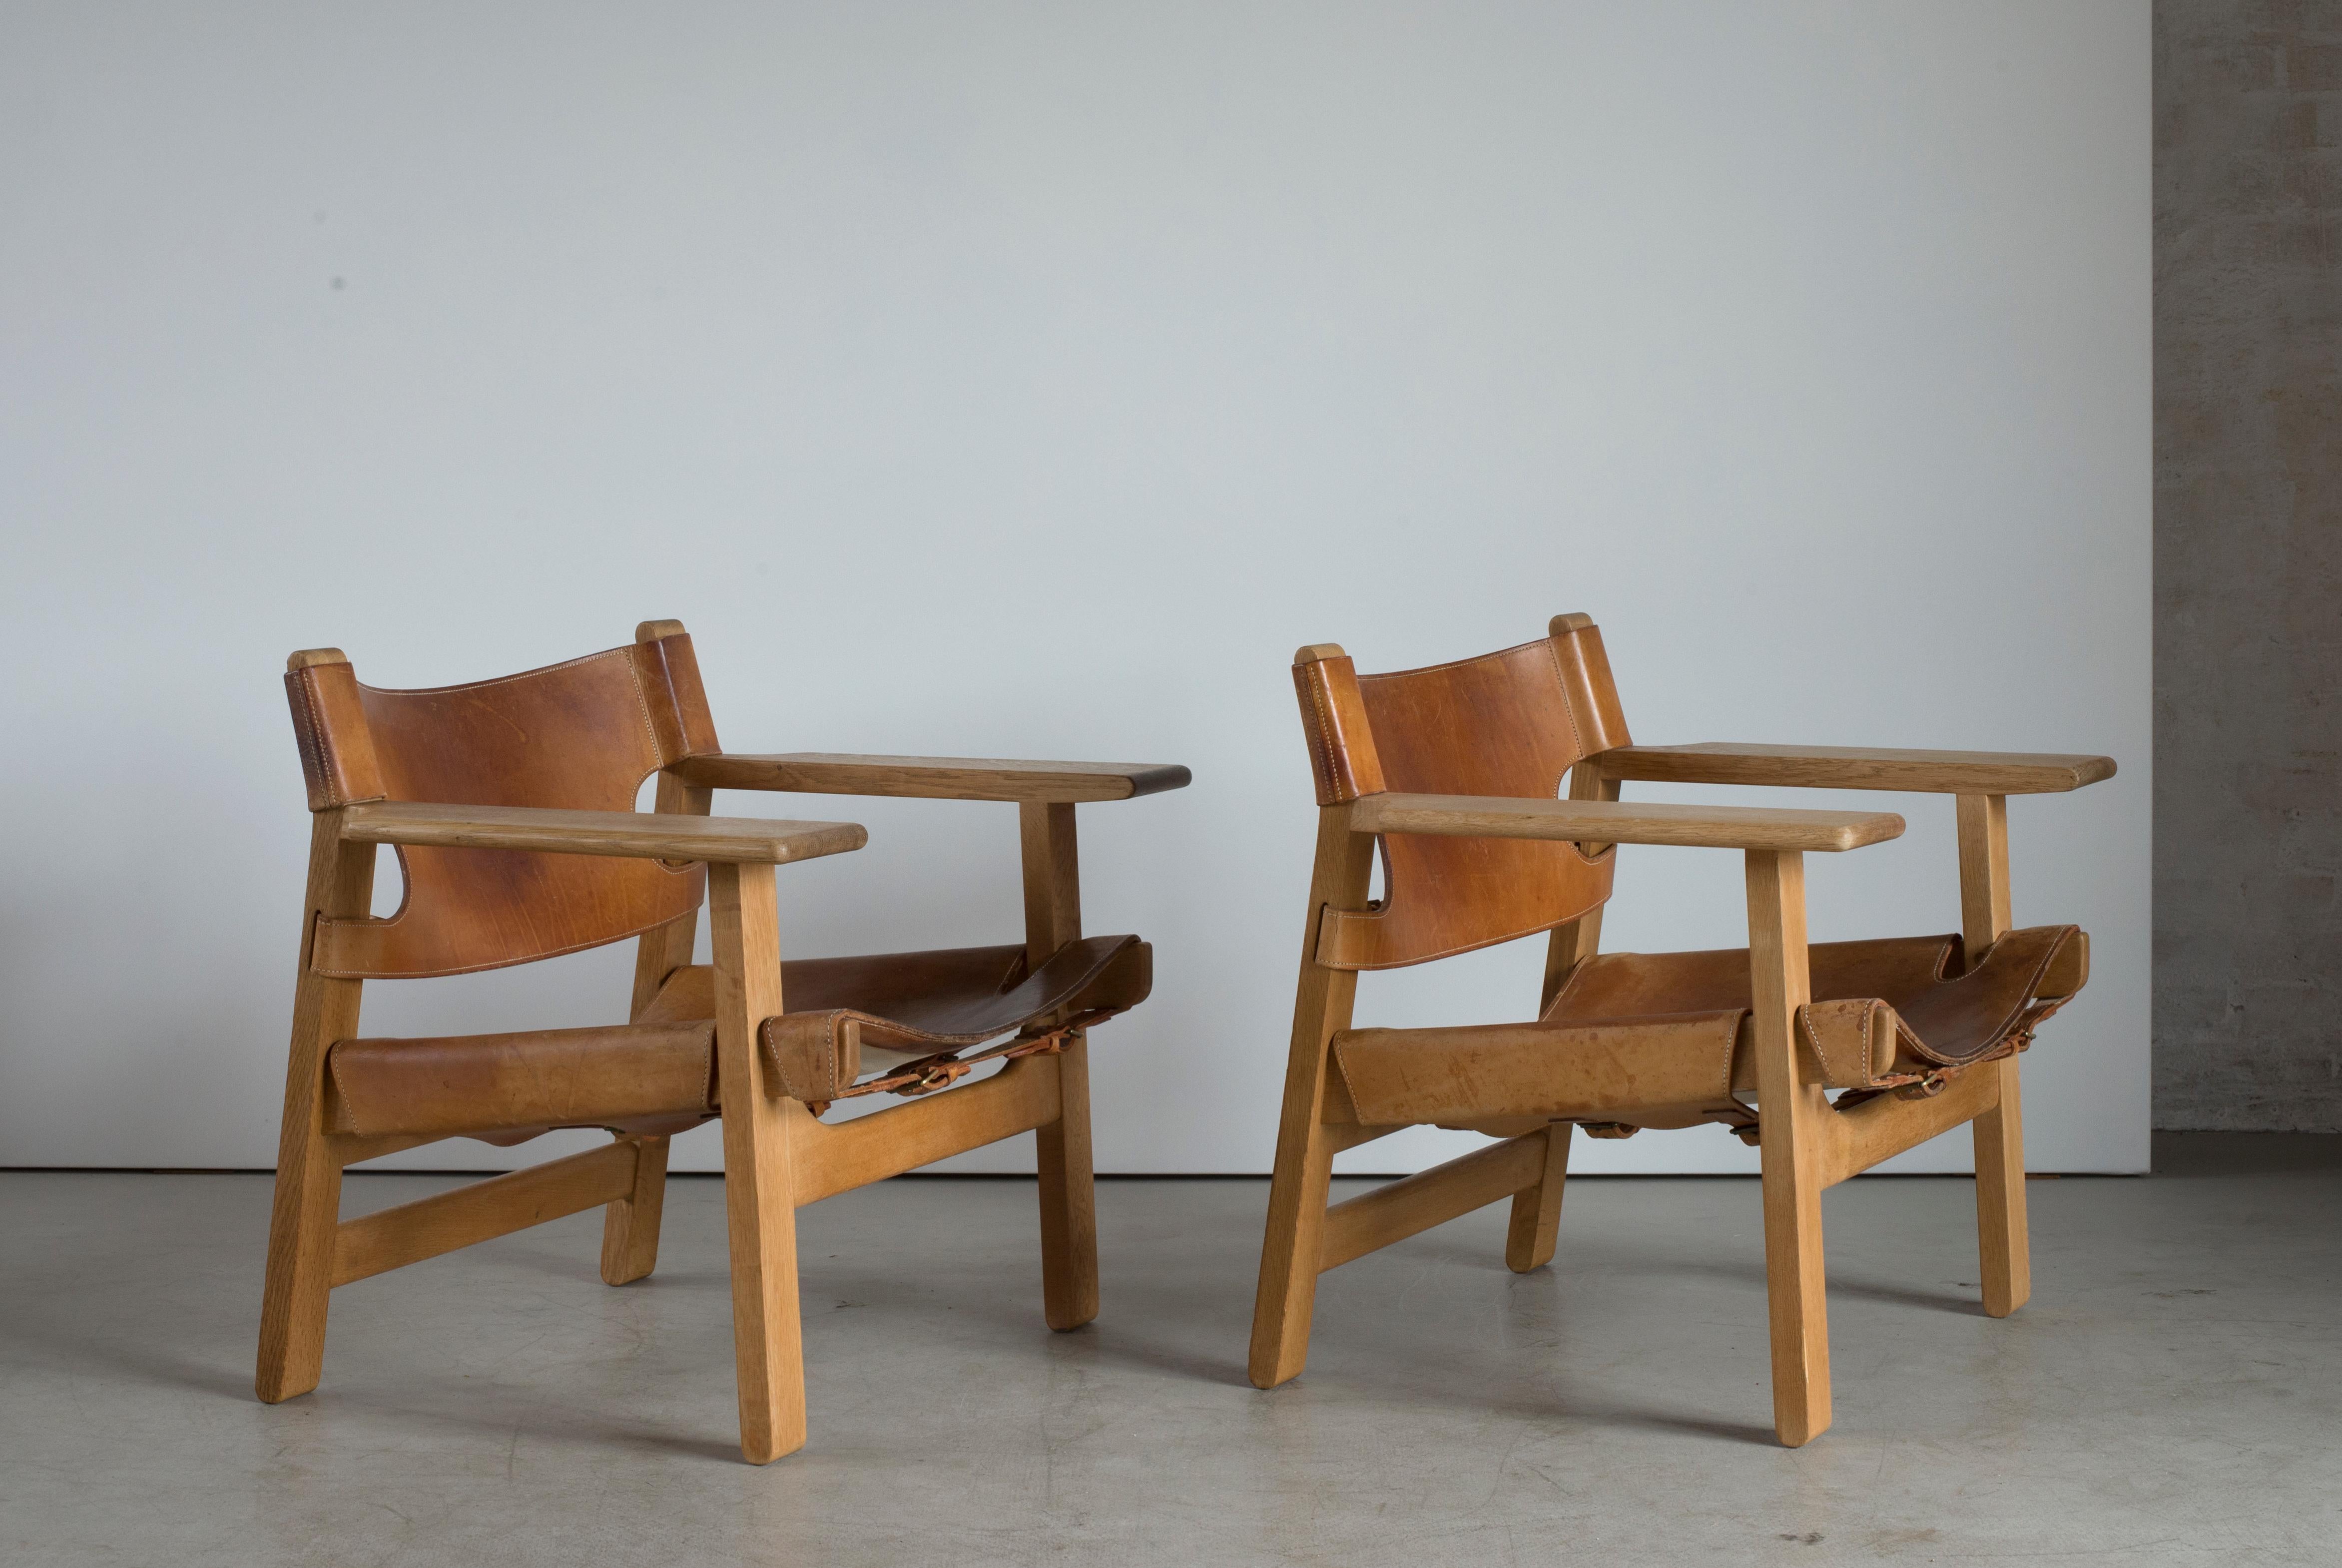 Børge Mogensen pair of Spanish chairs in oak and natural tanned leather. Executed by Fredericia Furniture. Leather by Dahlman, Copenhagen.